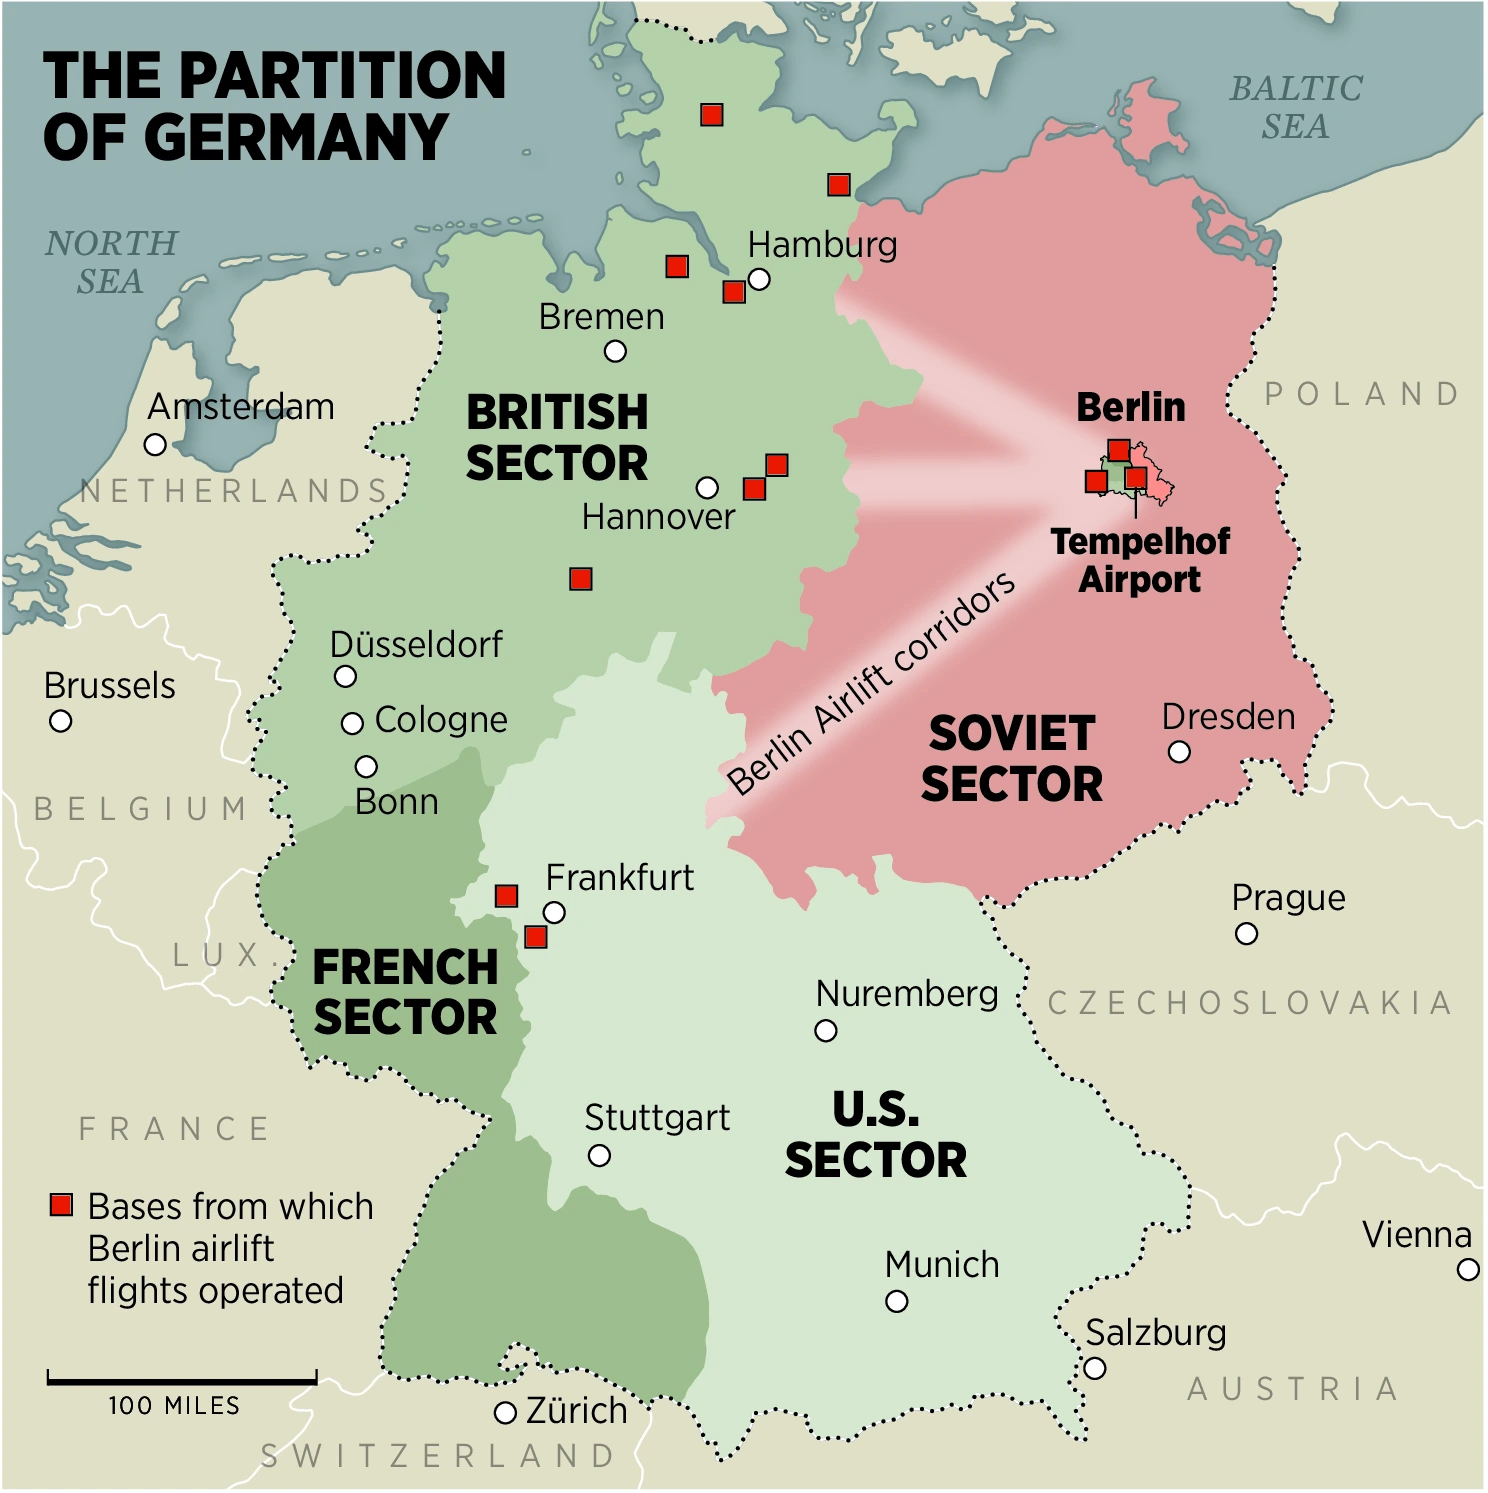 Partition of Germany following WW2